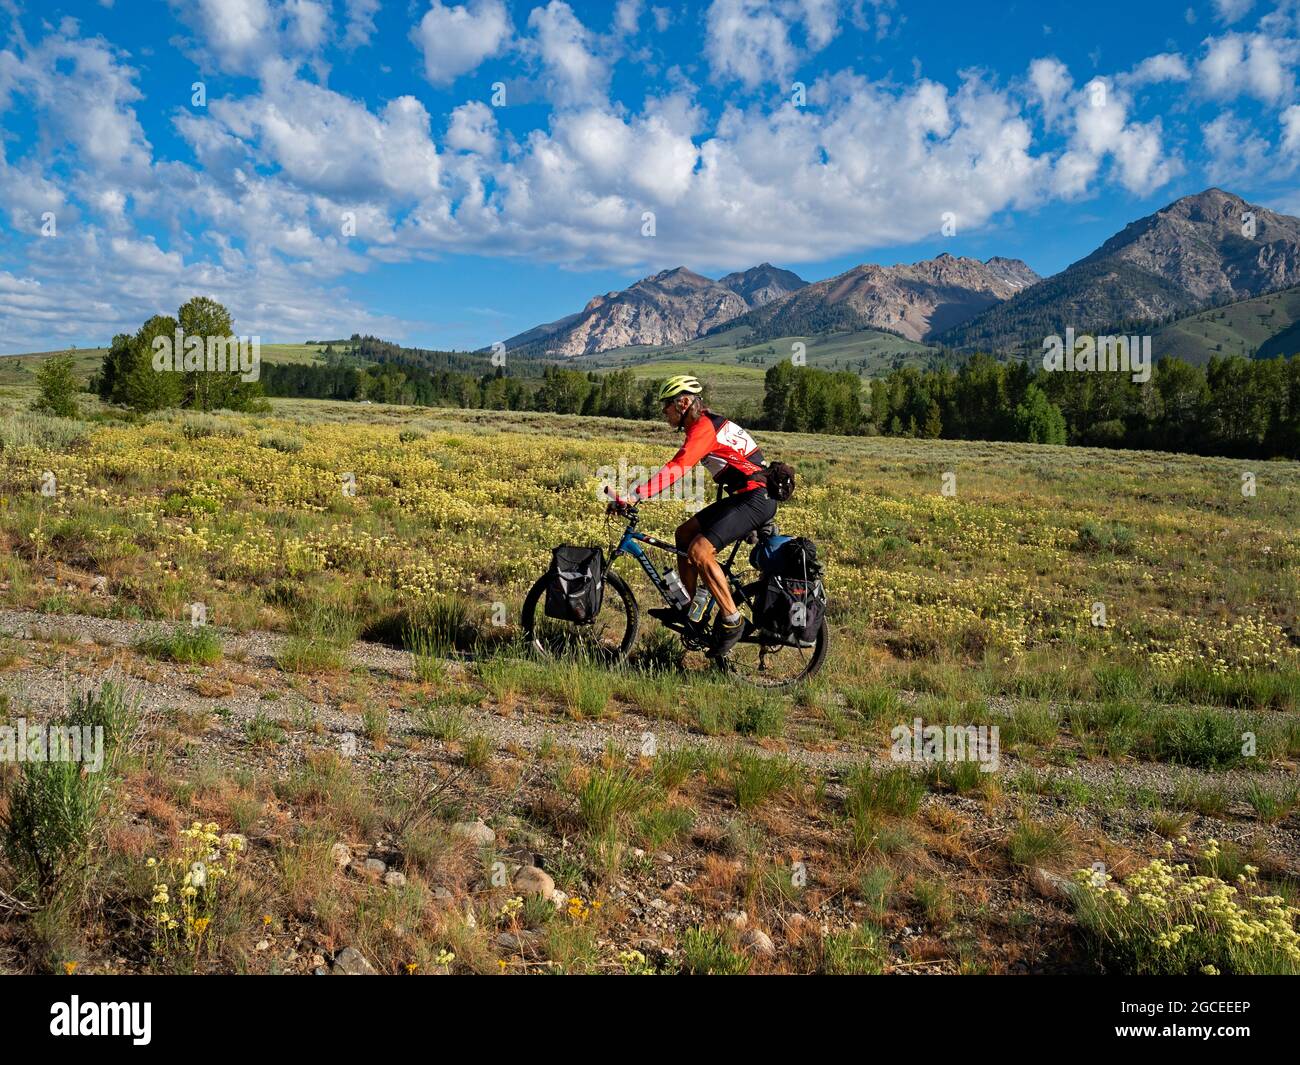 ID00801-00...IDAHO - Riding the Harriman Trail through flower covered meadows below the Boulder Mountains north of Ketchum, a scenic section of Advent Stock Photo